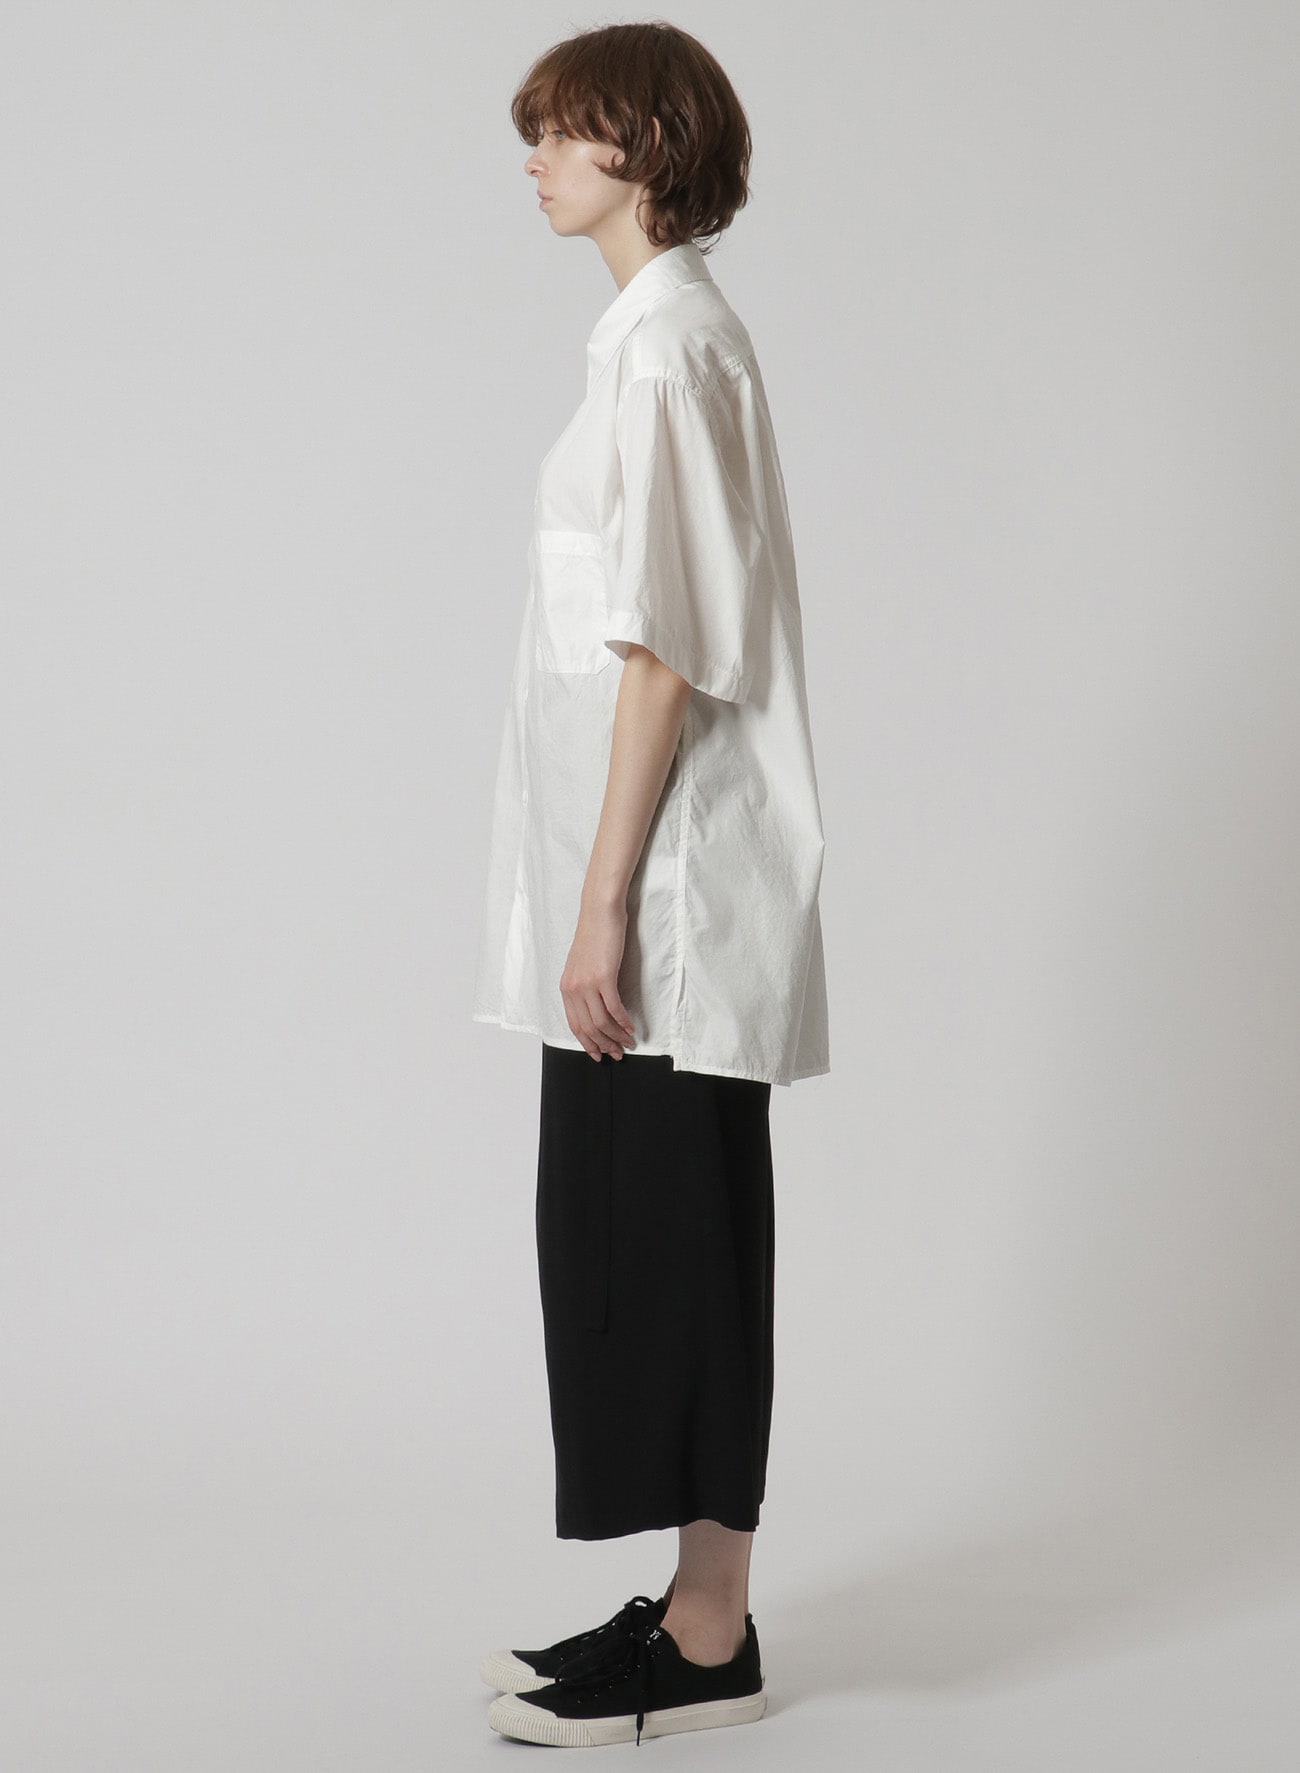 Y's-Black Name]COTTON TAPE SNAP SHIRT(S White): Y's｜THE SHOP 